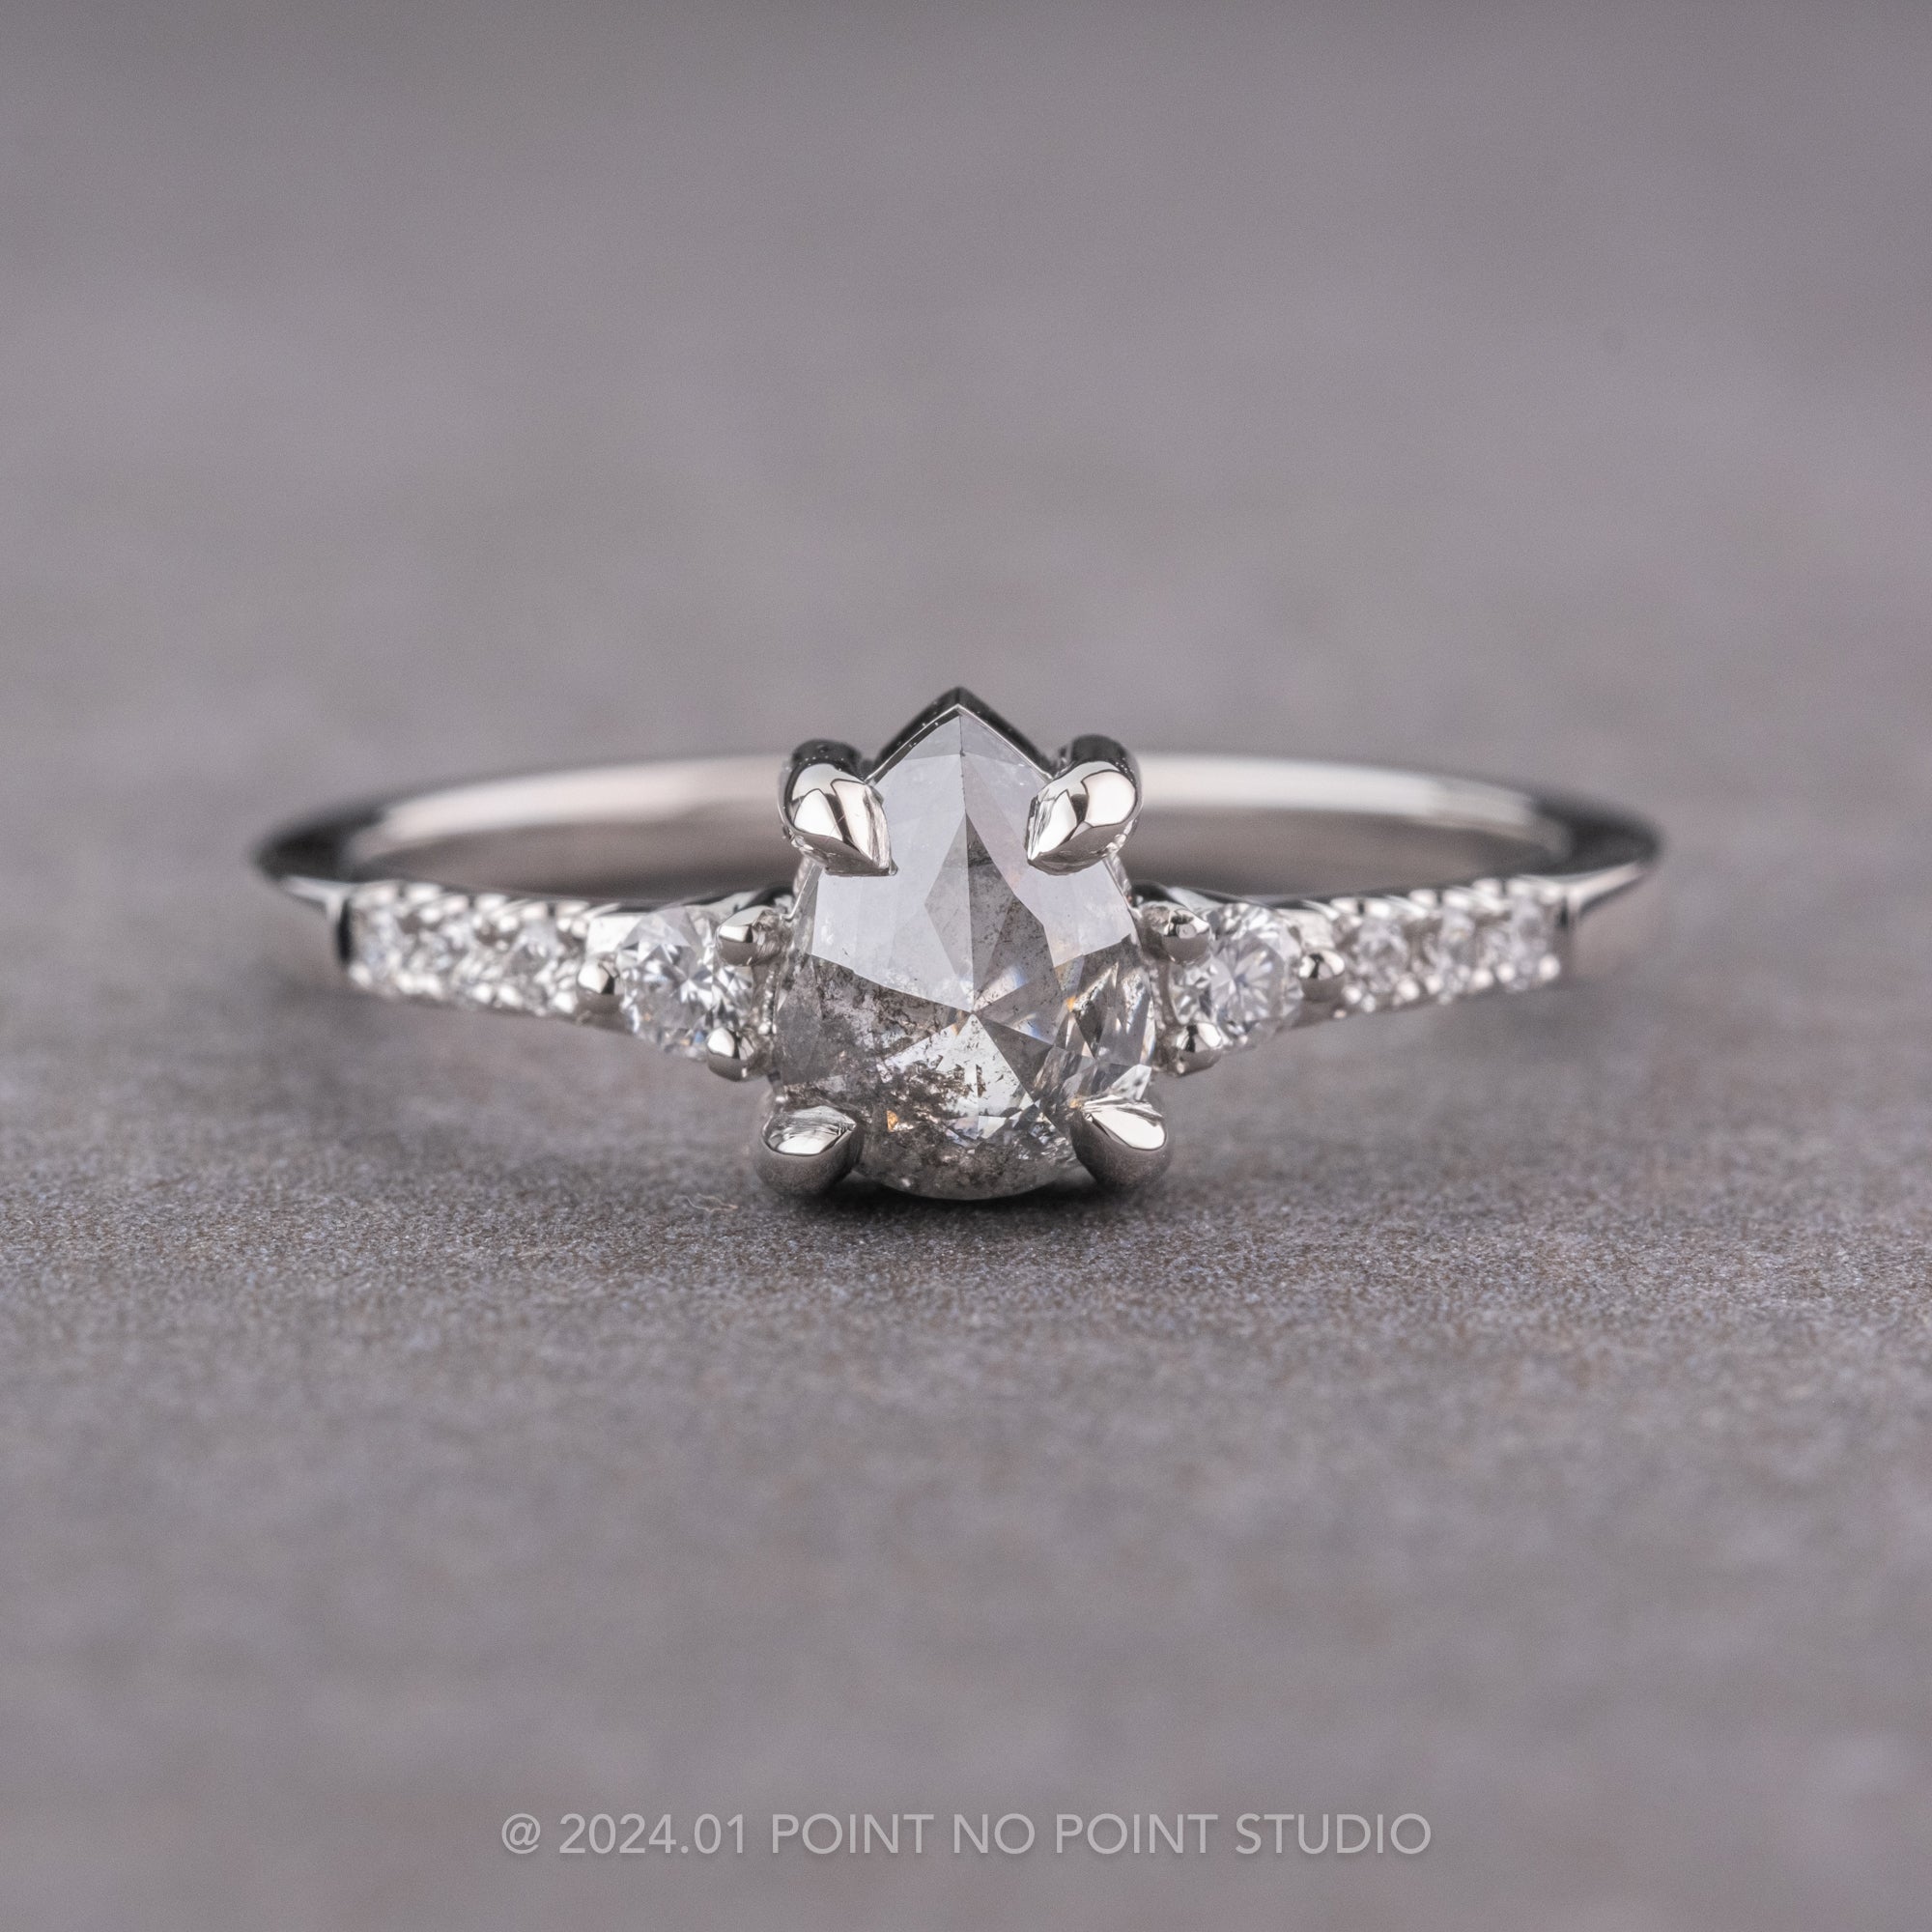 What would you add to my stack? I want to add character with another band  but not sure what. : r/EngagementRings